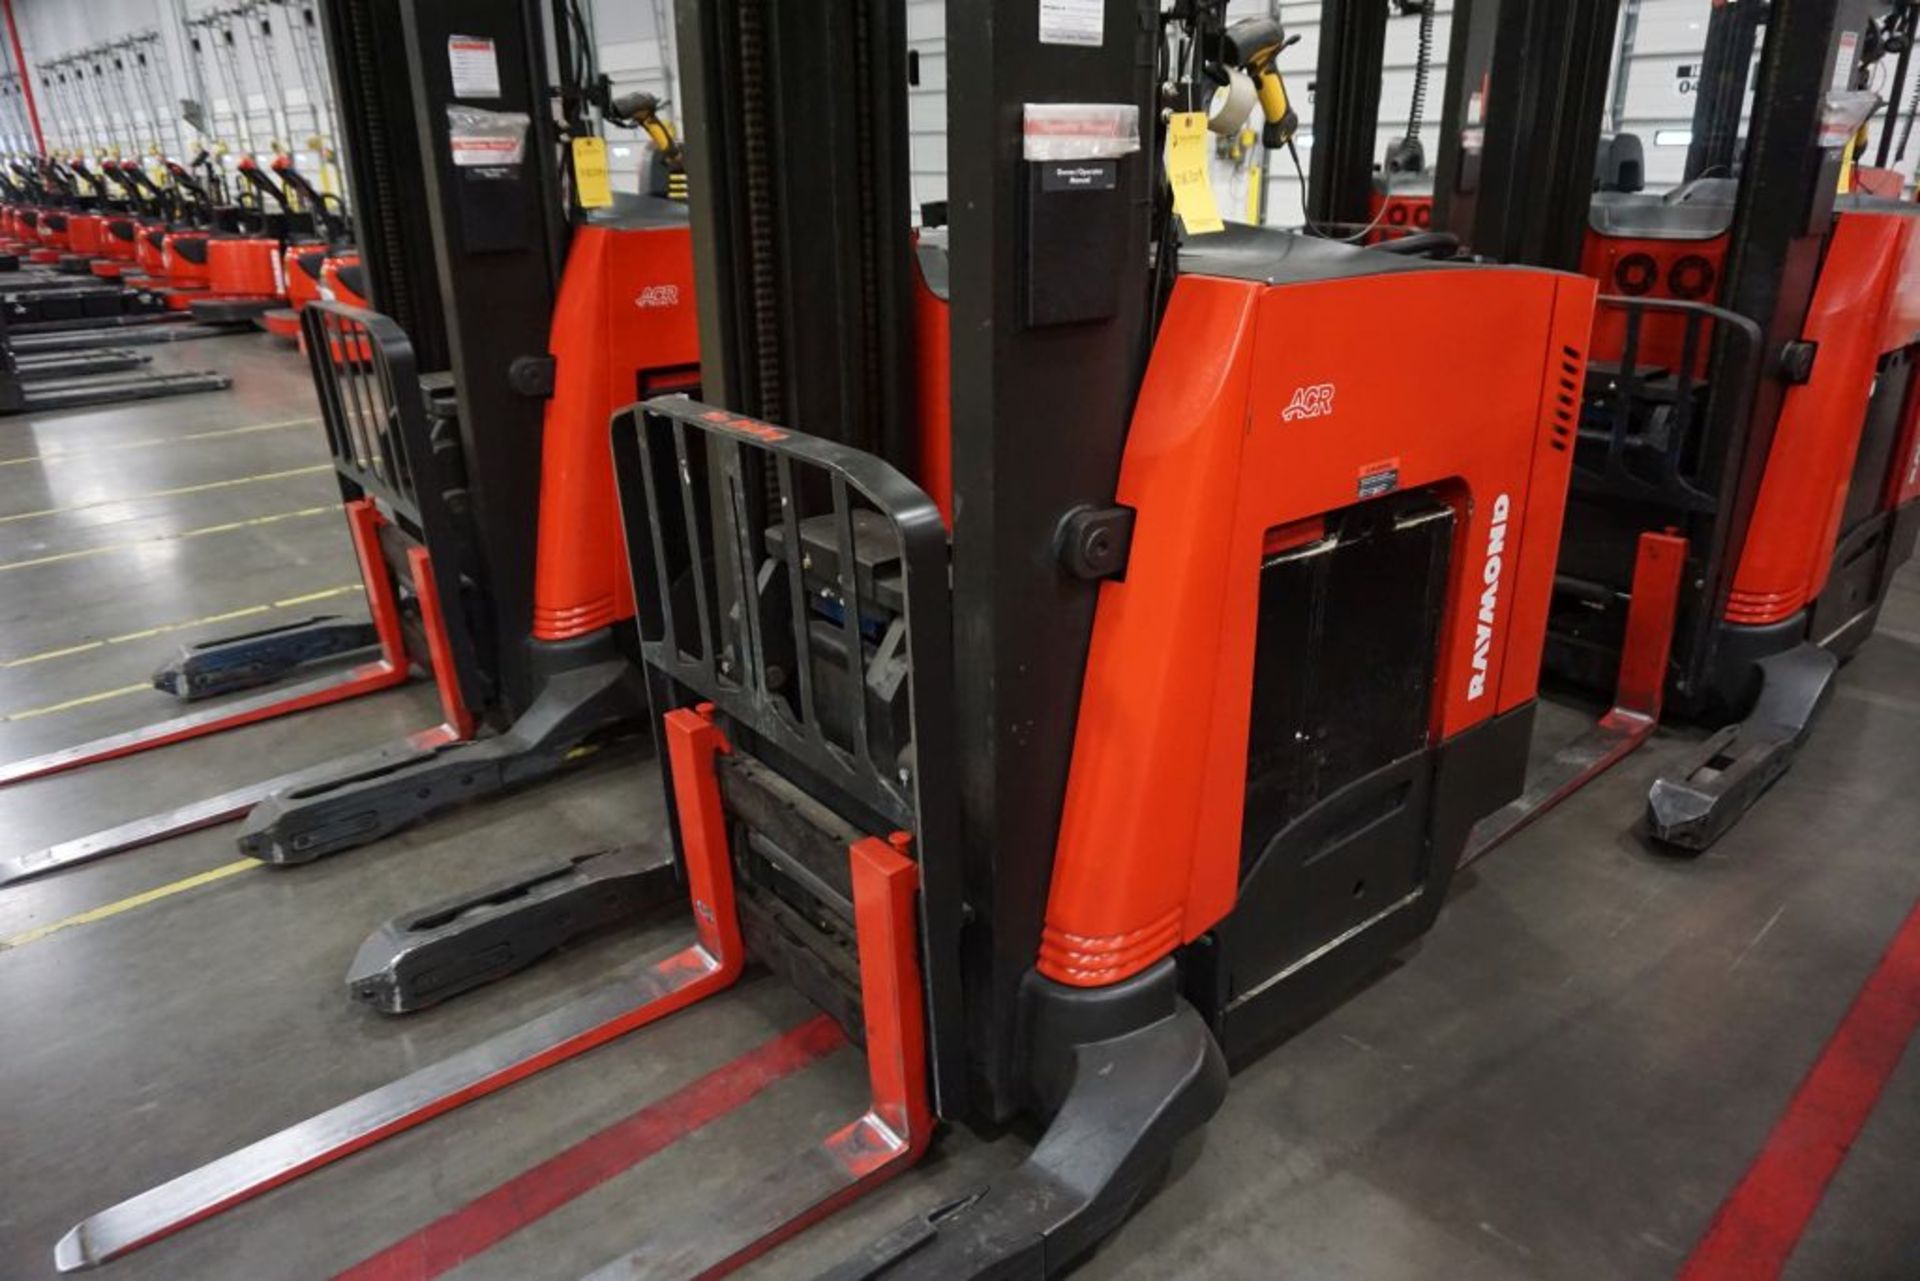 Raymond 7500 Universal Stance Reach Forklift - Model No. 750-R45TT; Serial No. 750-15-BC50725; - Image 3 of 19